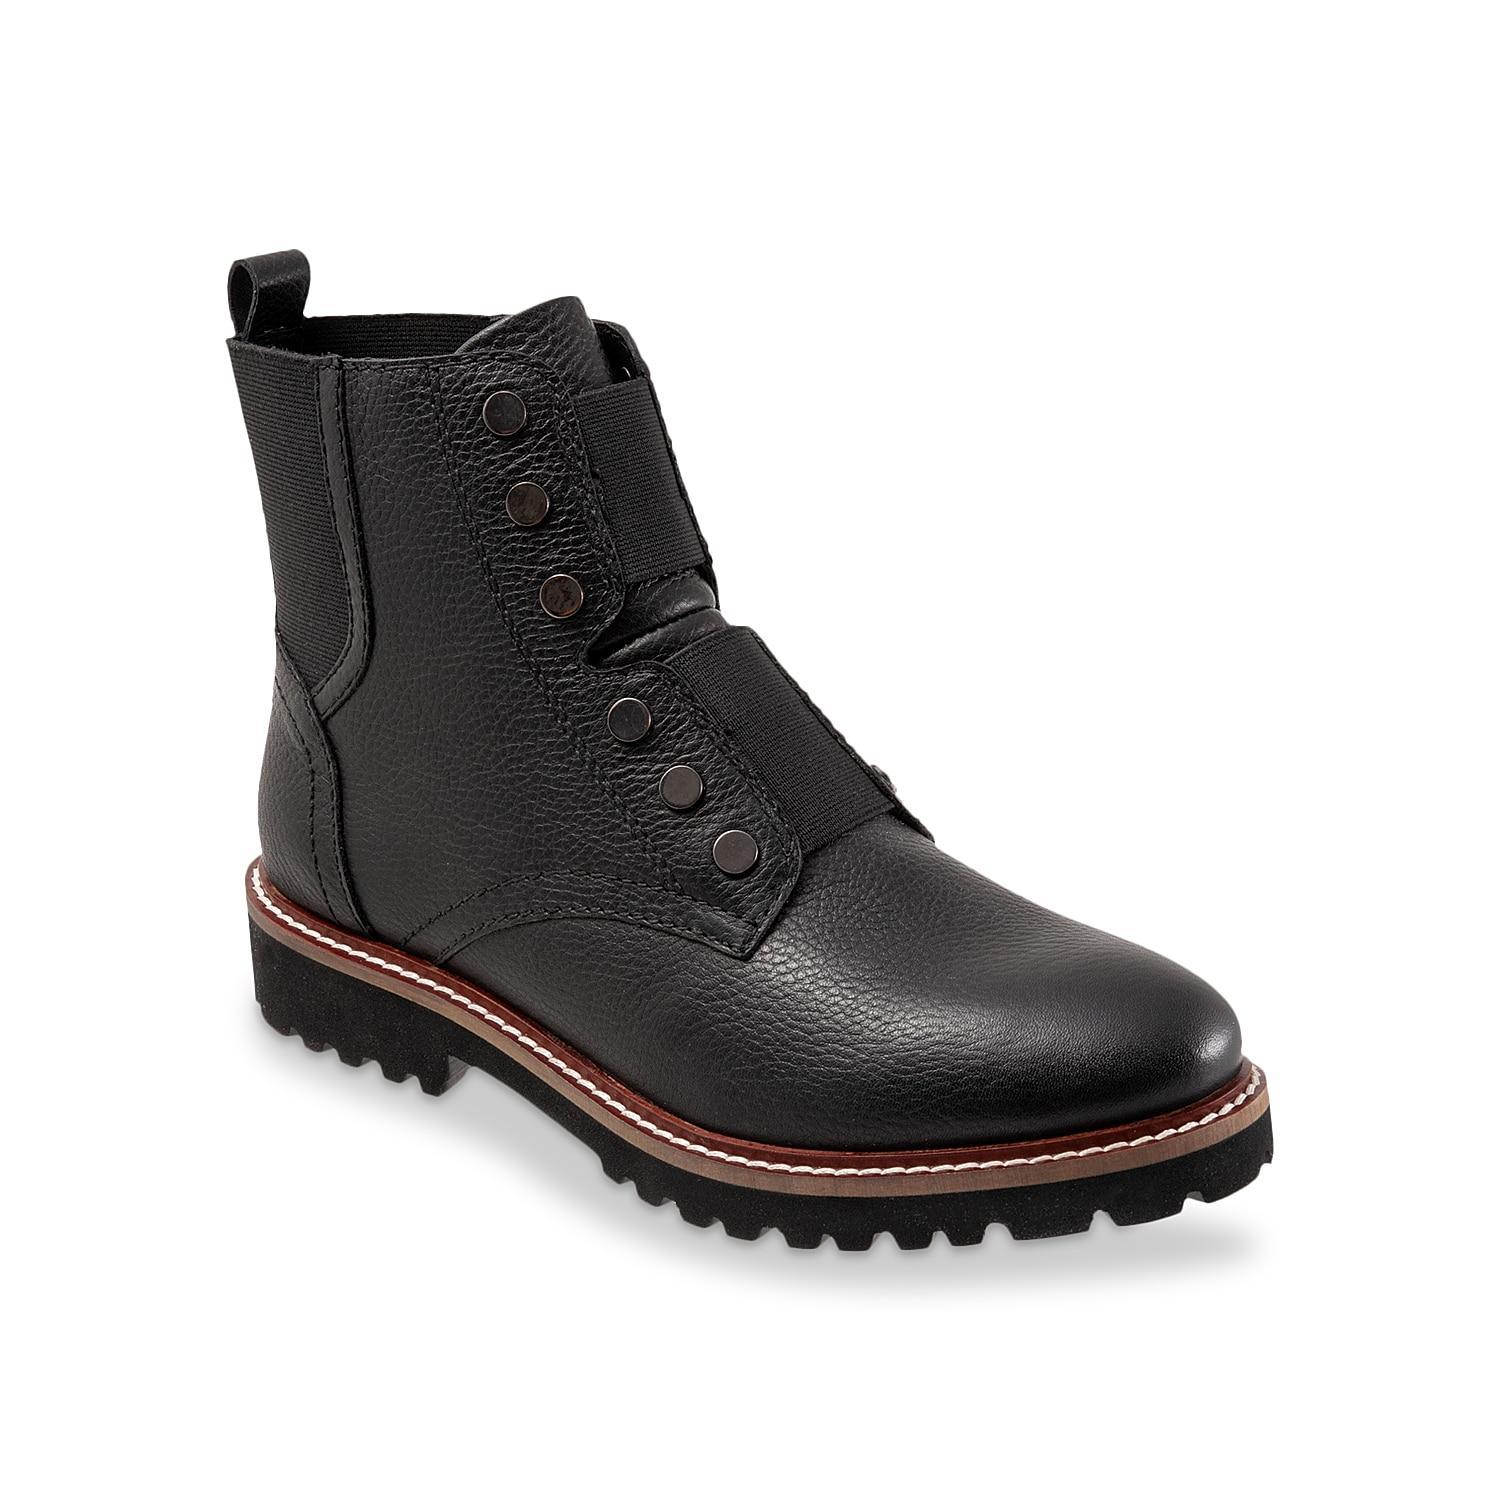 SoftWalk Indiana Chelsea Boot Product Image